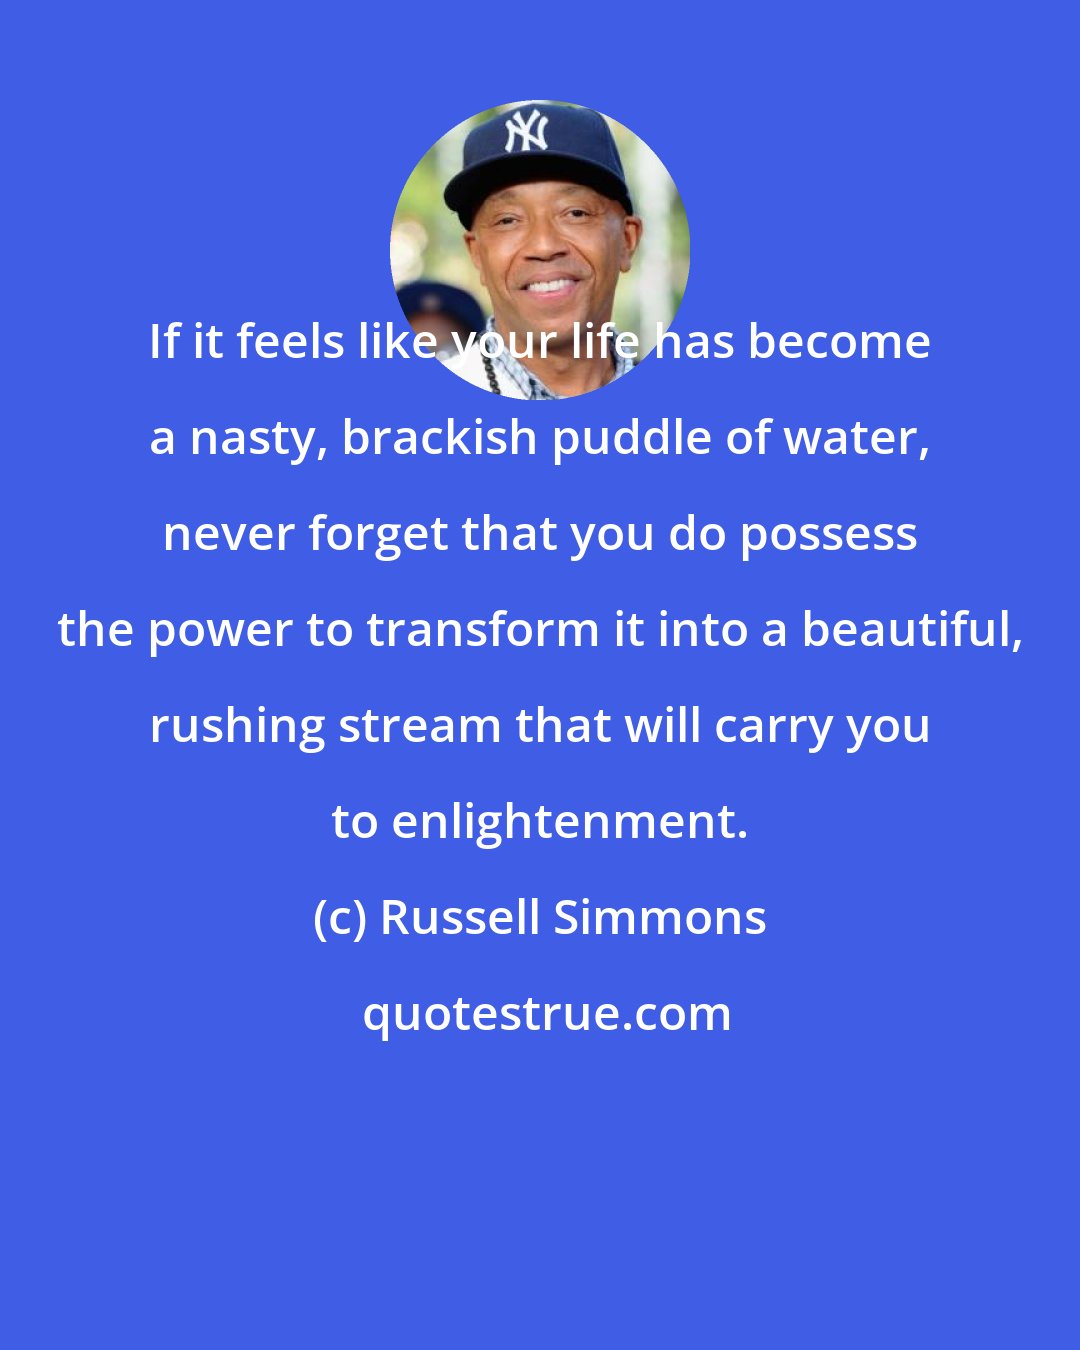 Russell Simmons: If it feels like your life has become a nasty, brackish puddle of water, never forget that you do possess the power to transform it into a beautiful, rushing stream that will carry you to enlightenment.